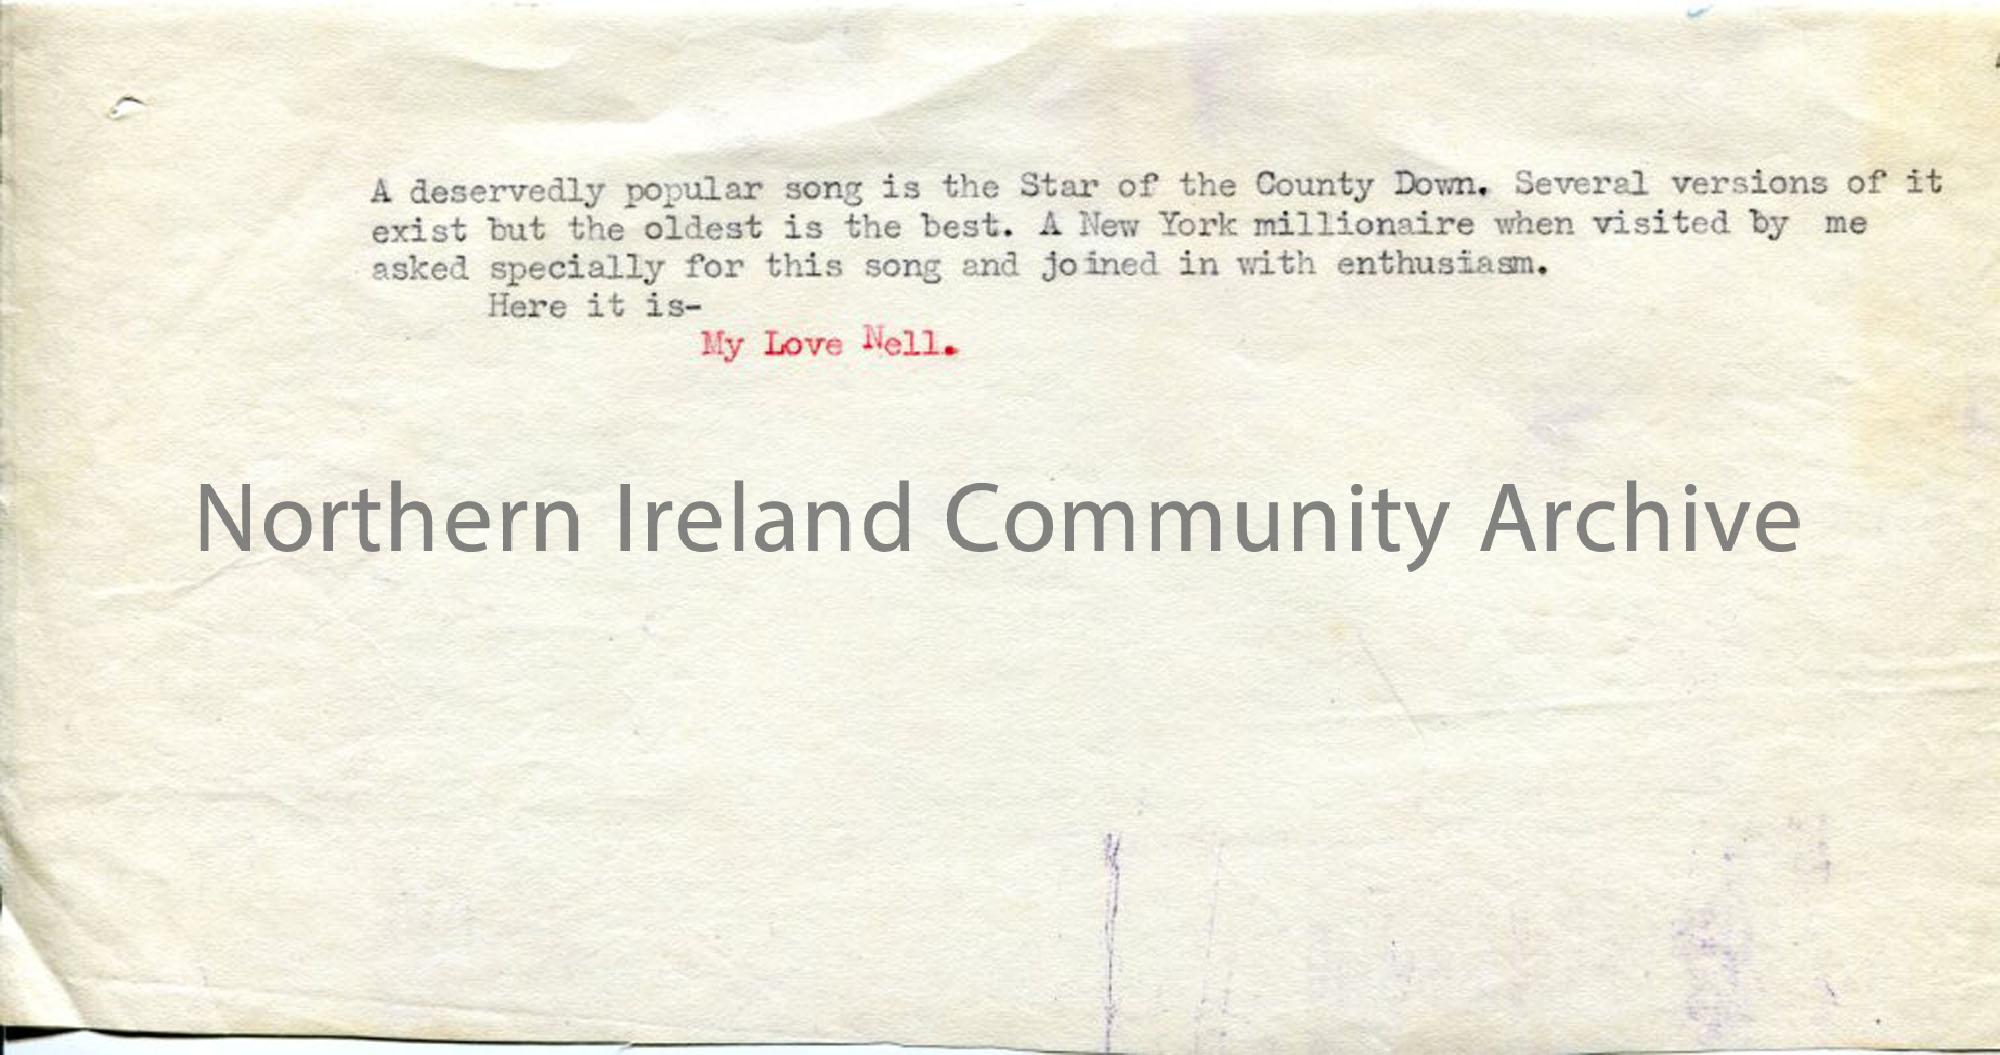 Paragraph about Popular Songs from County Down